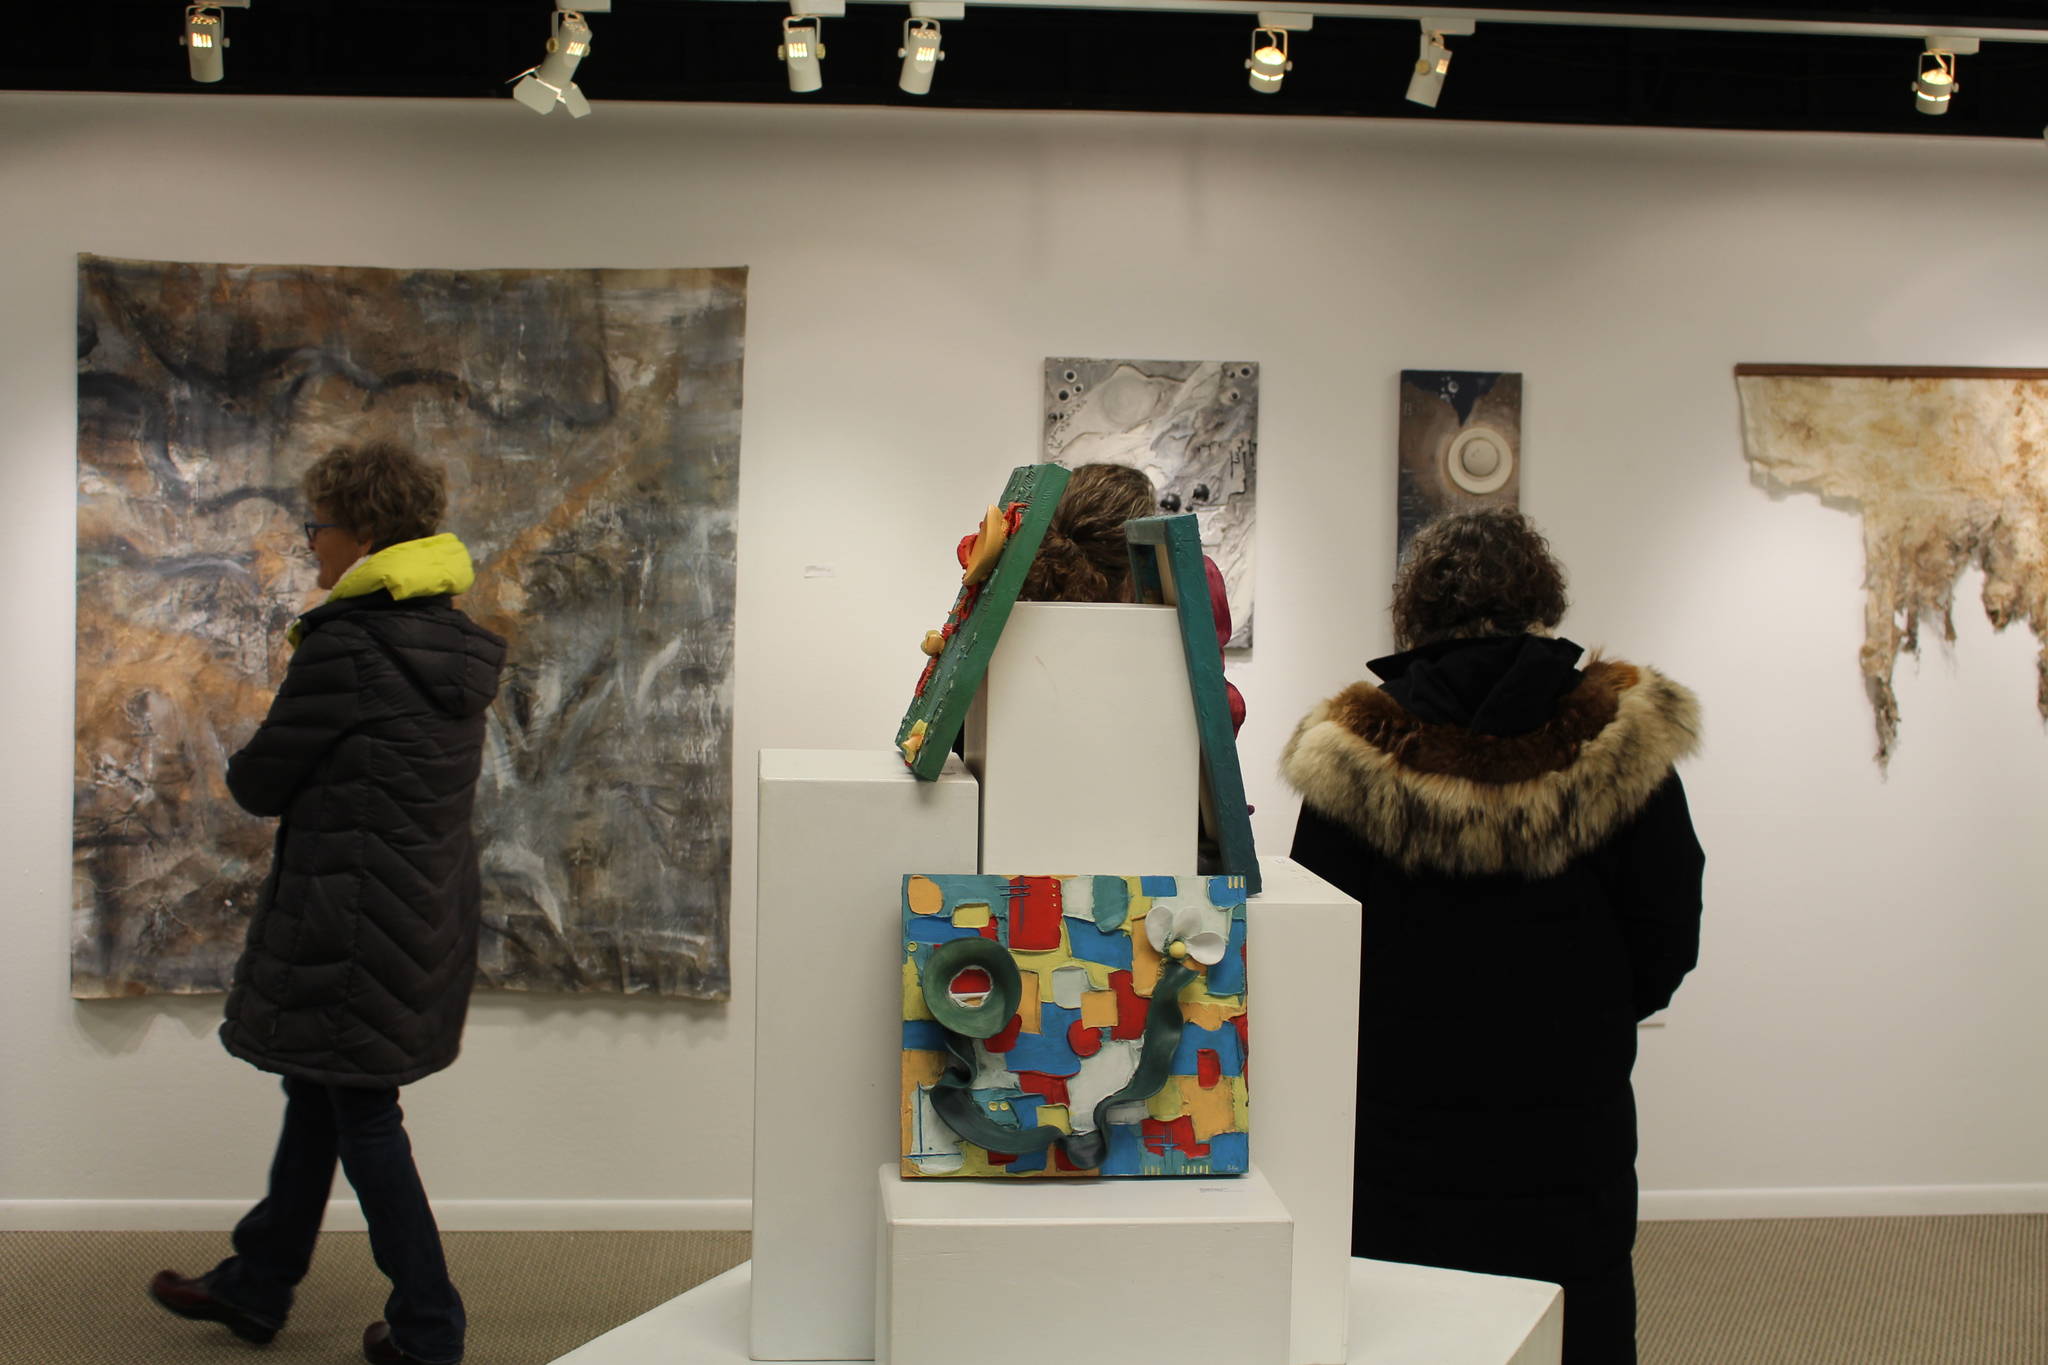 The work of Stephanie Cox and Anna Widman is seen here on display at the Kenai Fine Art Center in Kenai, Alaska, on Jan. 2, 2020. (Photo by Brian Mazurek/Peninsula Clarion)